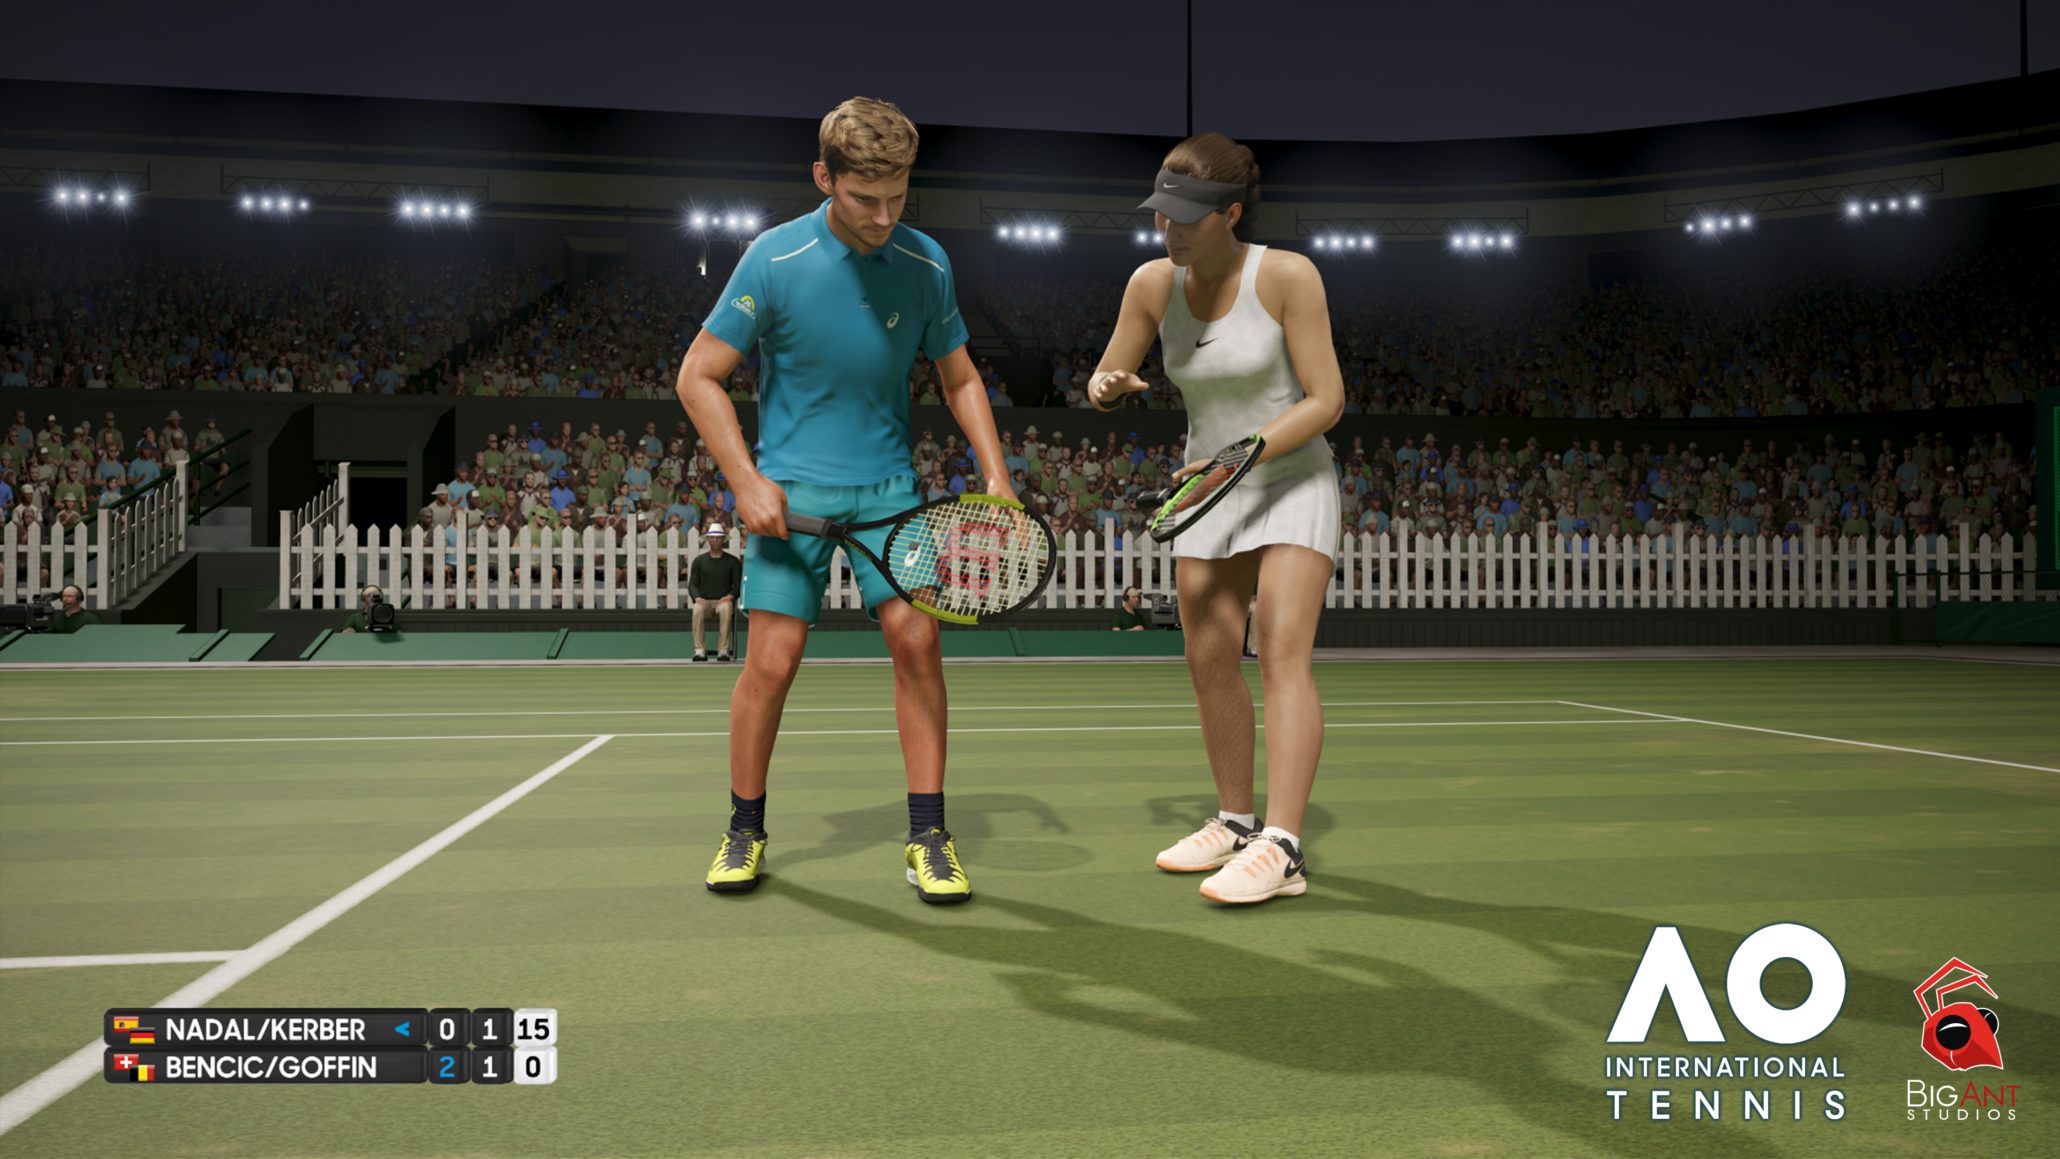 A New Update Patch Has Been Released For AO International Tennis This Week